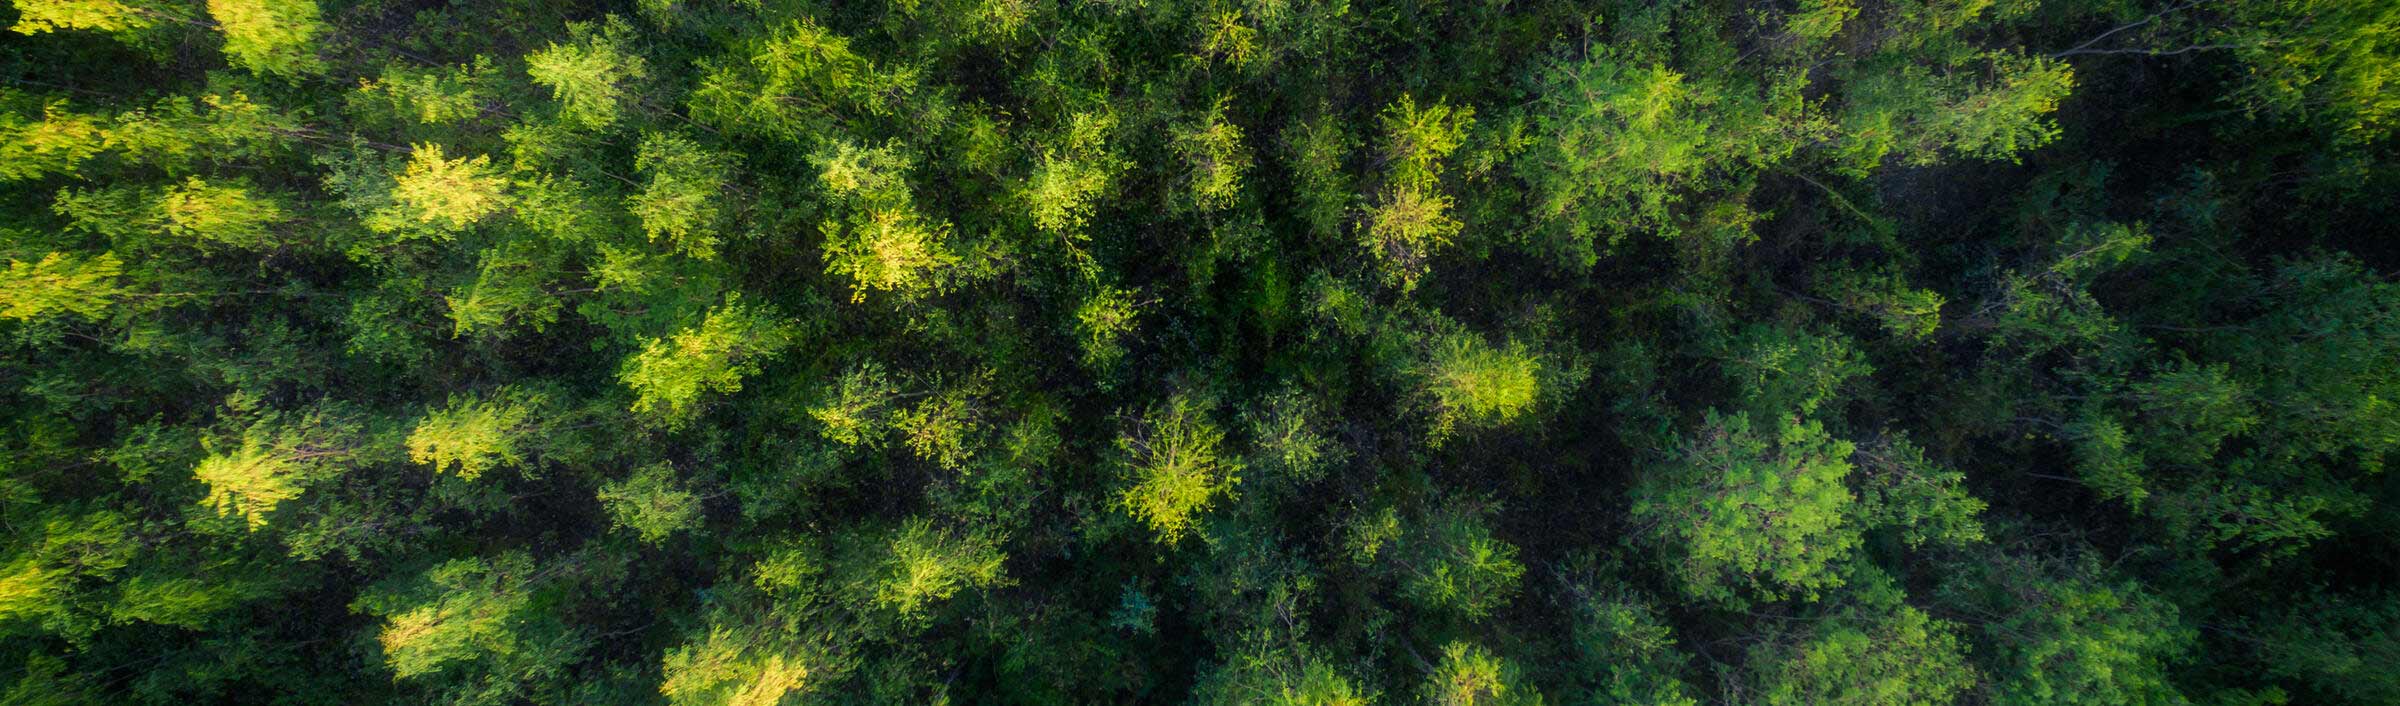 Top angle aerial image of a forest